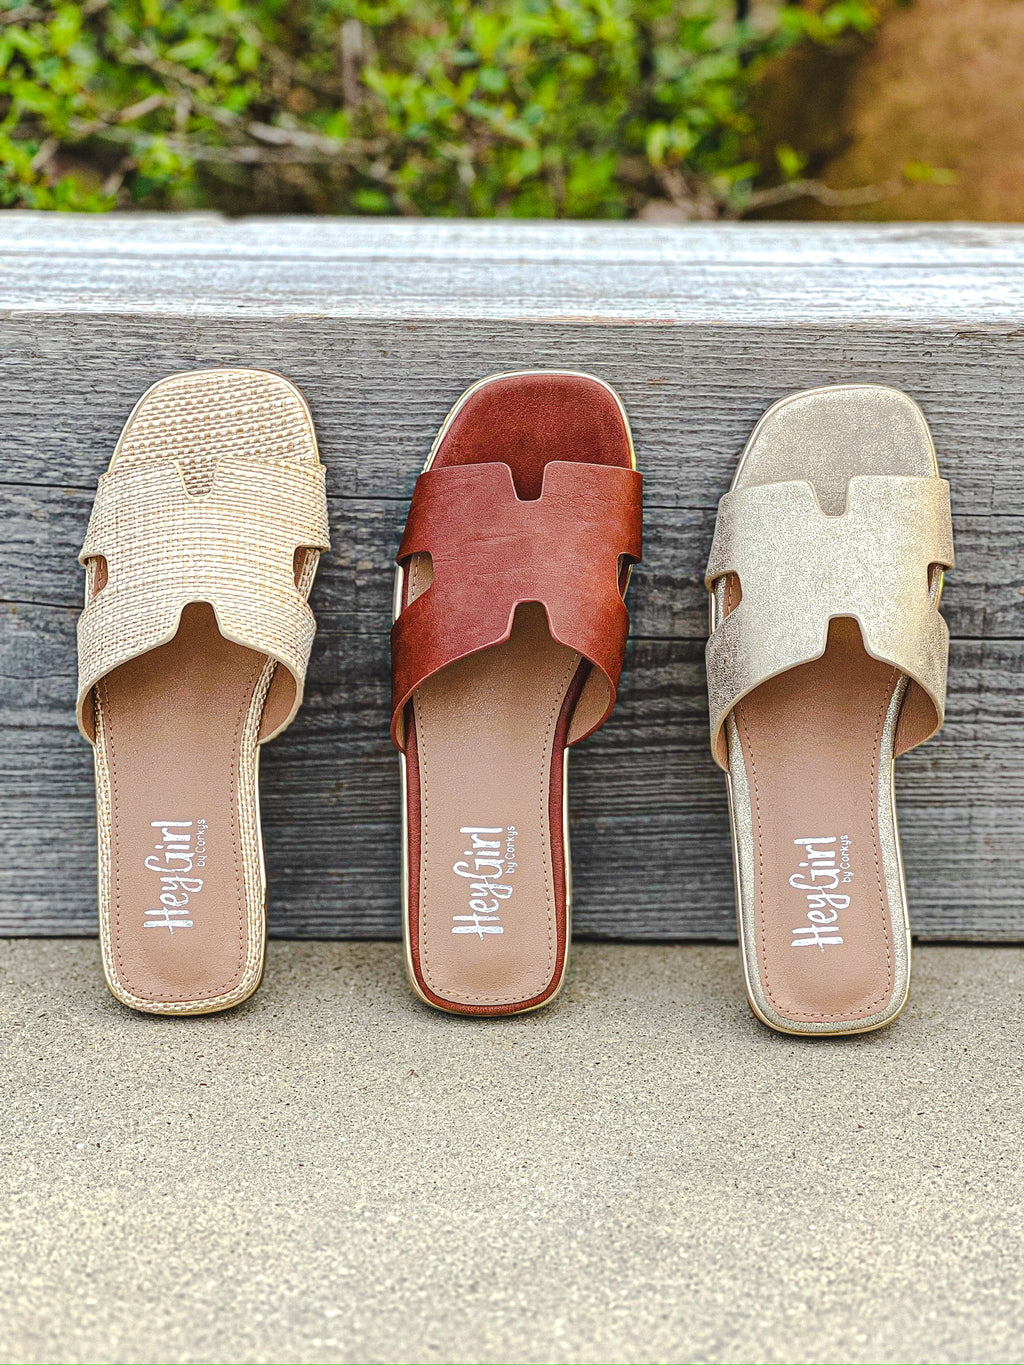 PICTURE PERFECT SANDALS